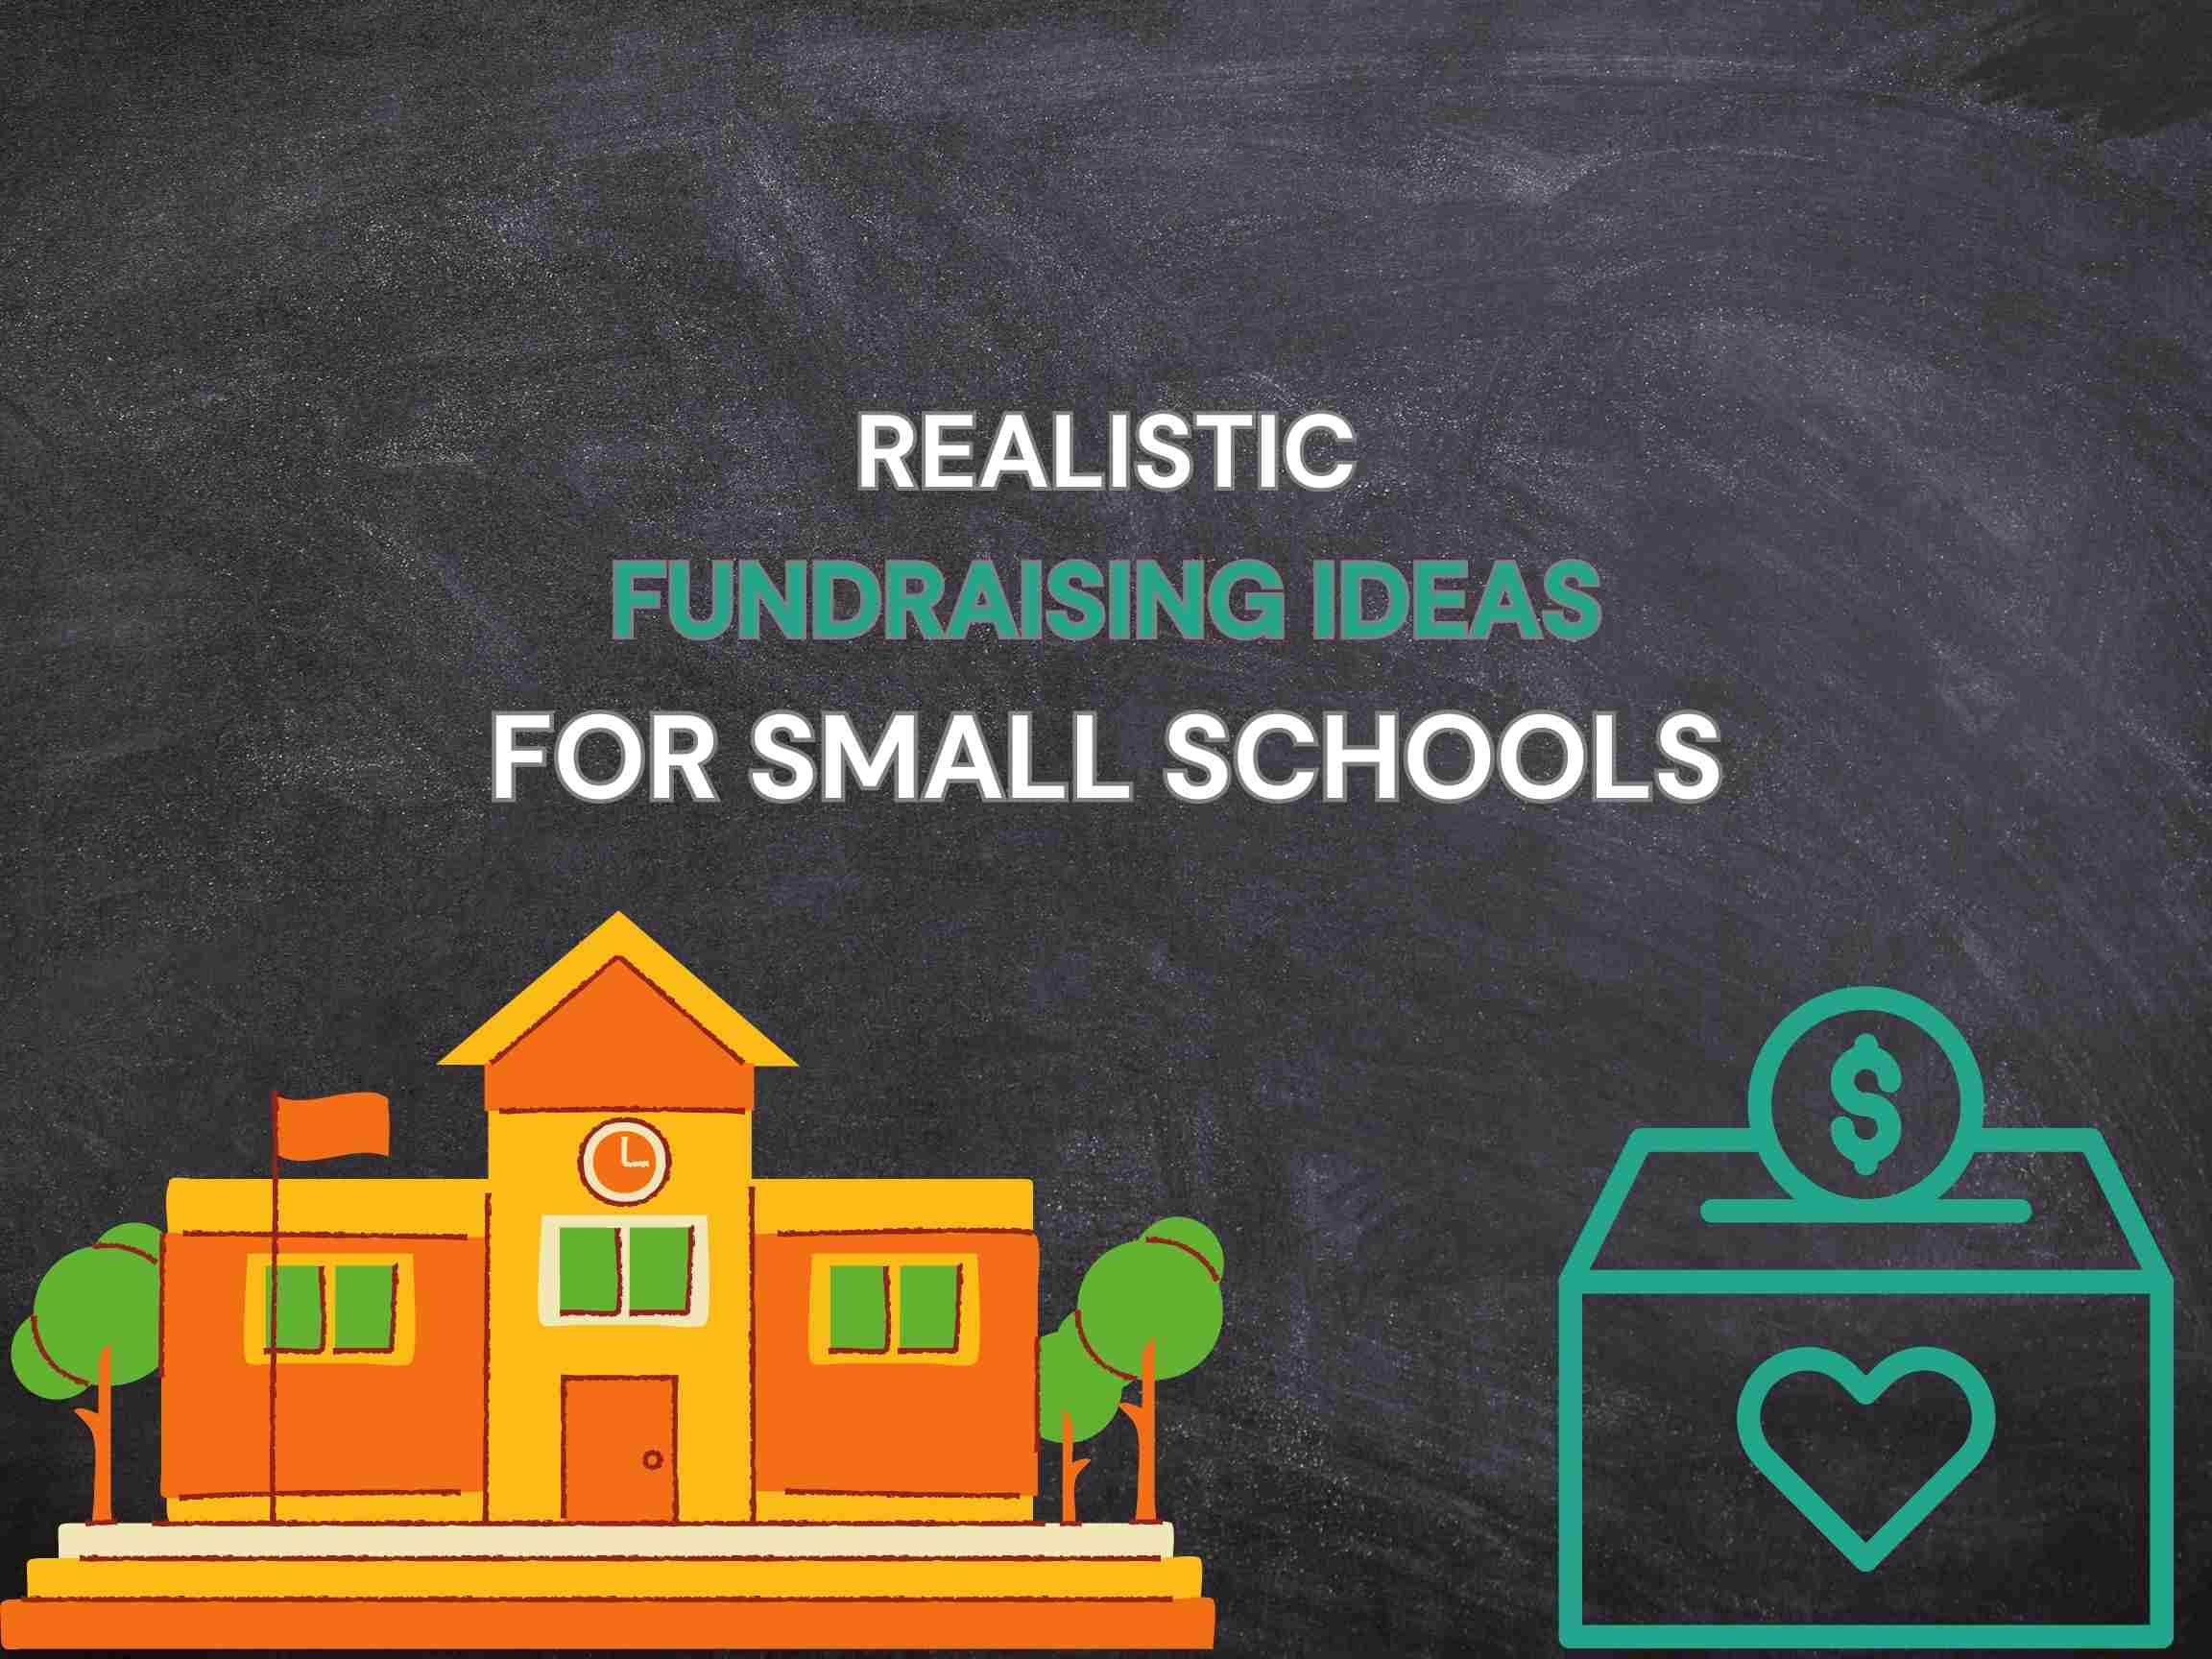 Fundraising ideas for small schools